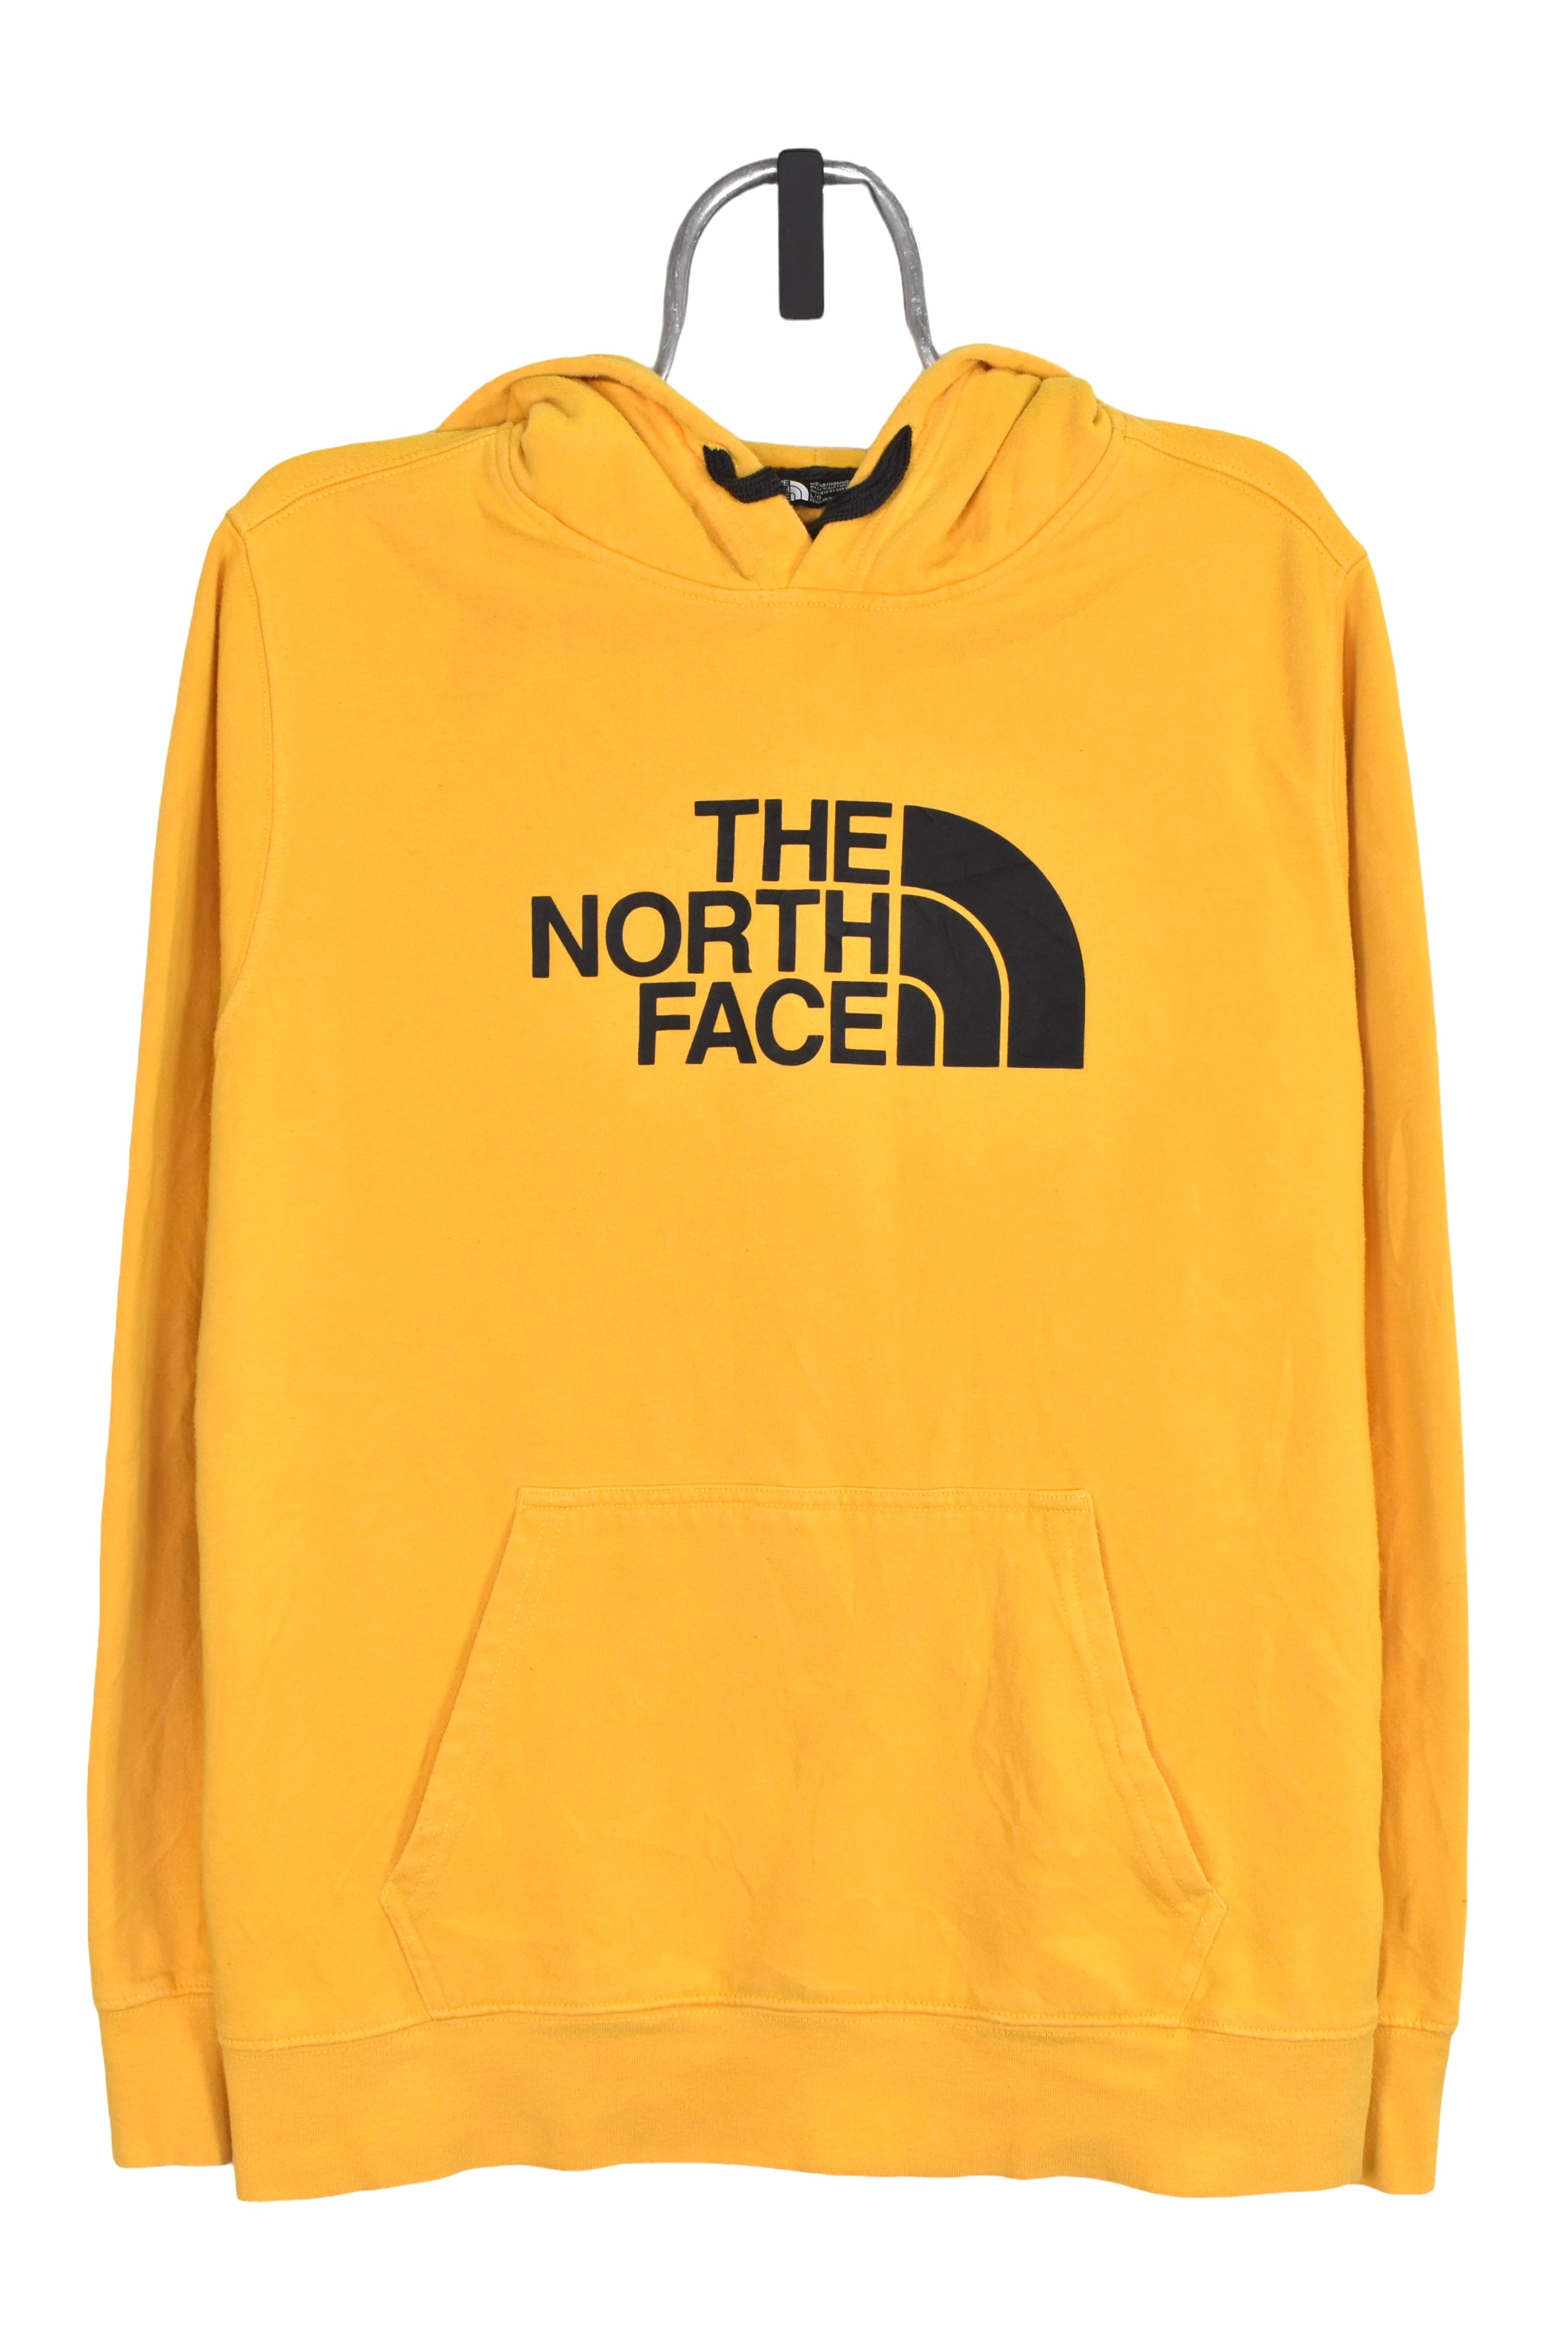 Vintage The North Face hoodie (L), yellow graphic sweatshirt